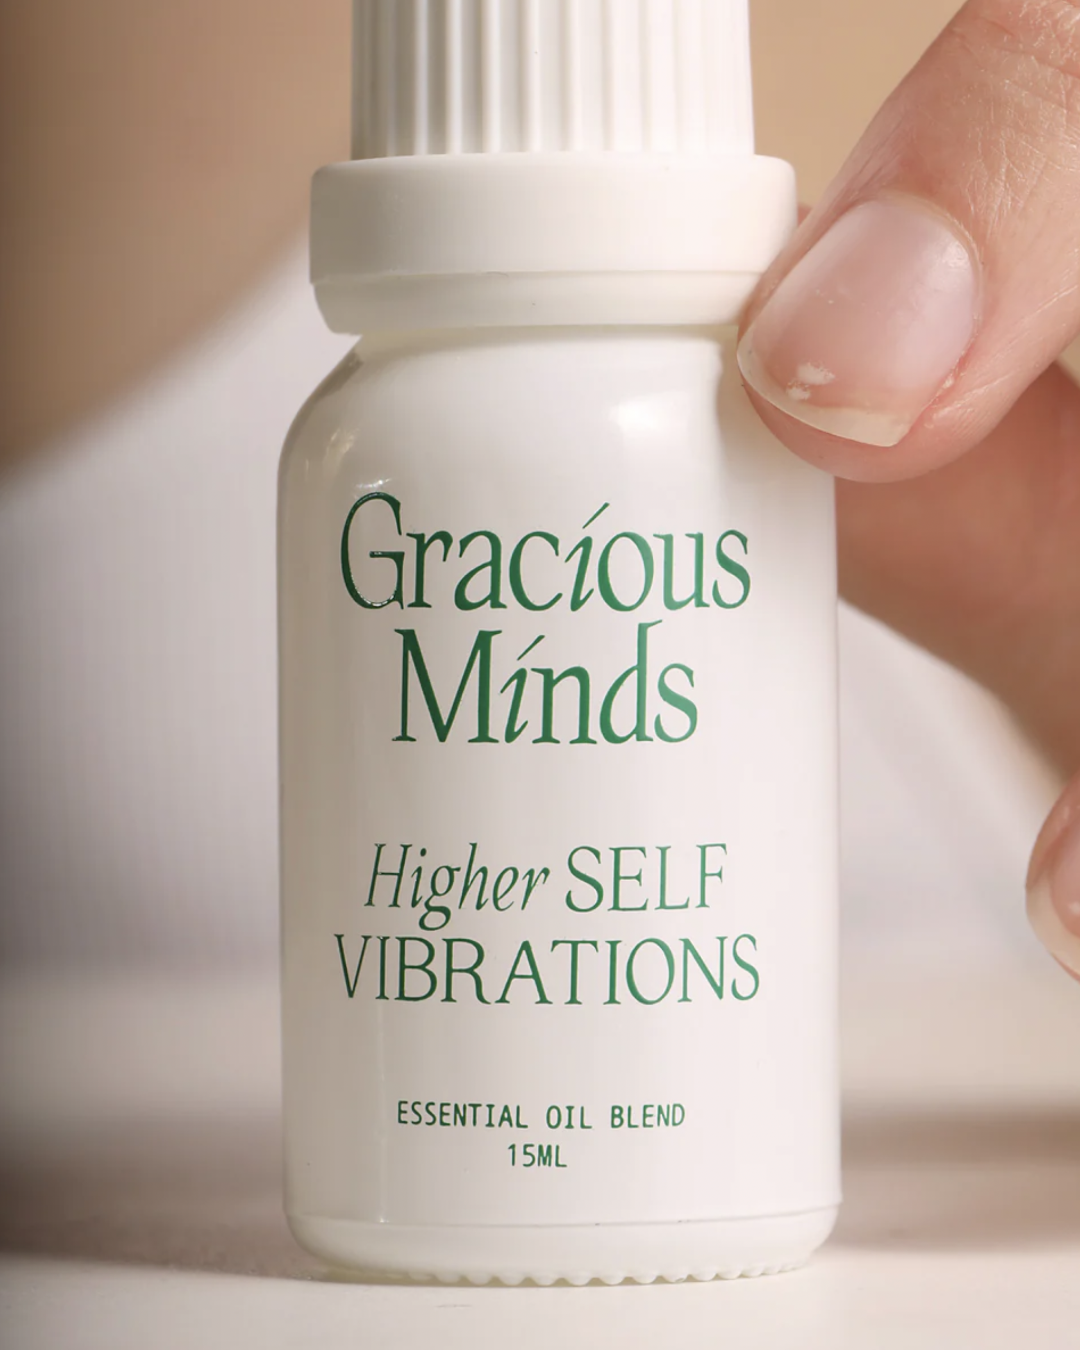 Higher Self Vibrations Essential Oil Blend Essential Oils by Gracious Minds - Prae Wellness